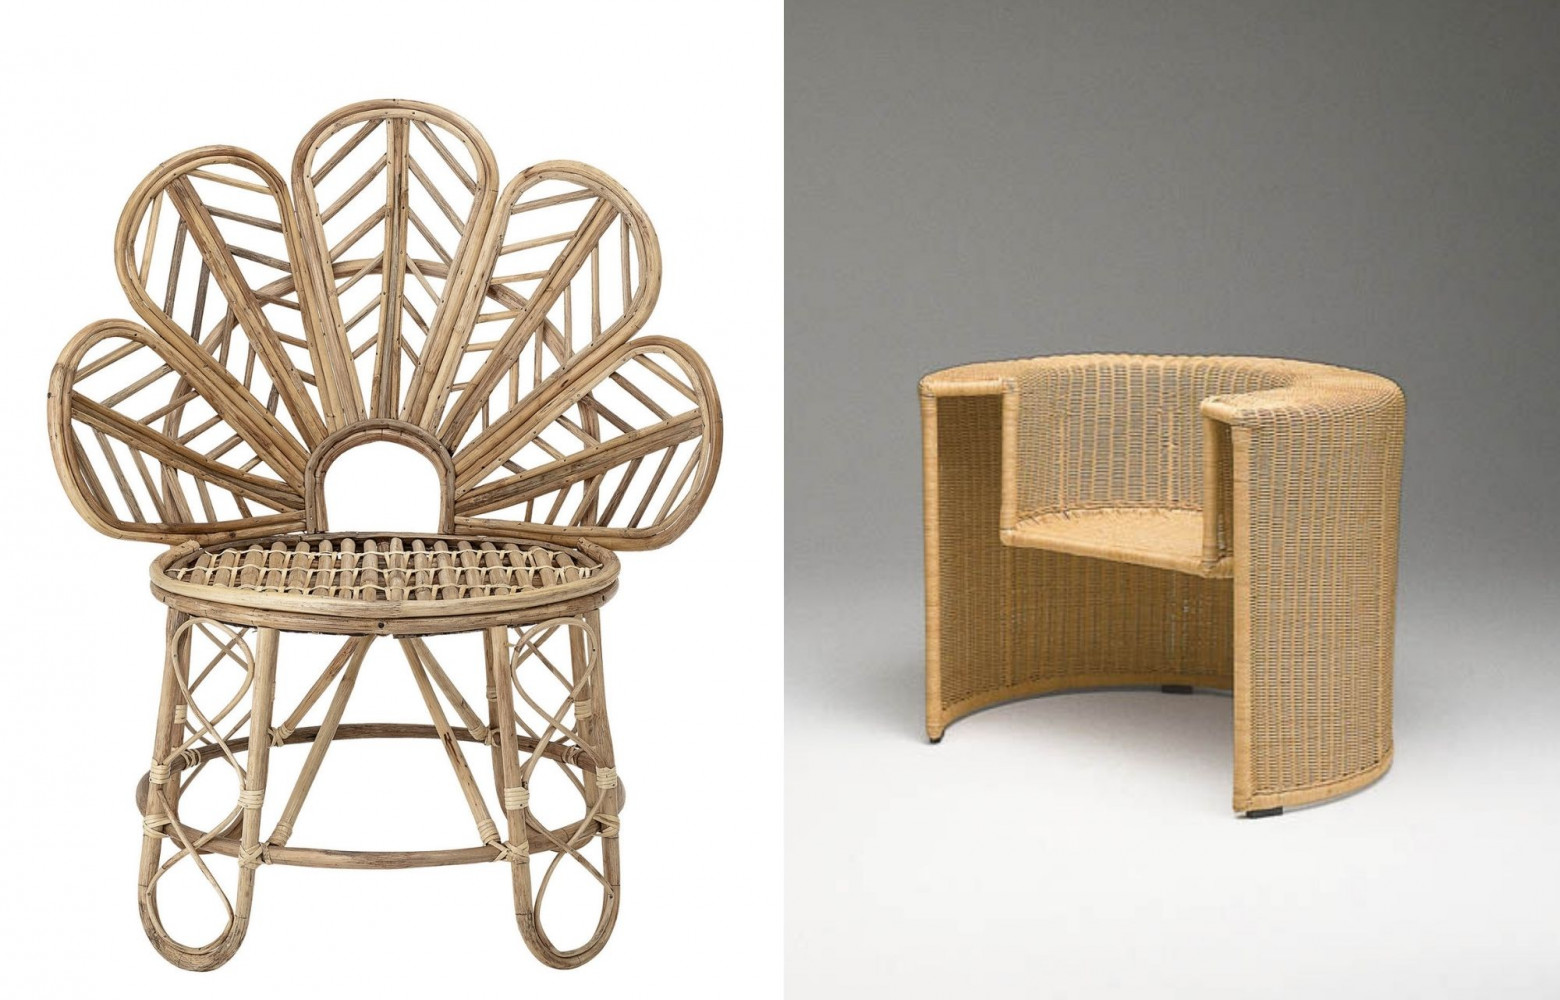 A gauche : Fauteuil Emmy/Rotin, Bloomingville, 399 €. A droite : Fauteuil Charlotte/Rotin, Horm. 1 723 €.